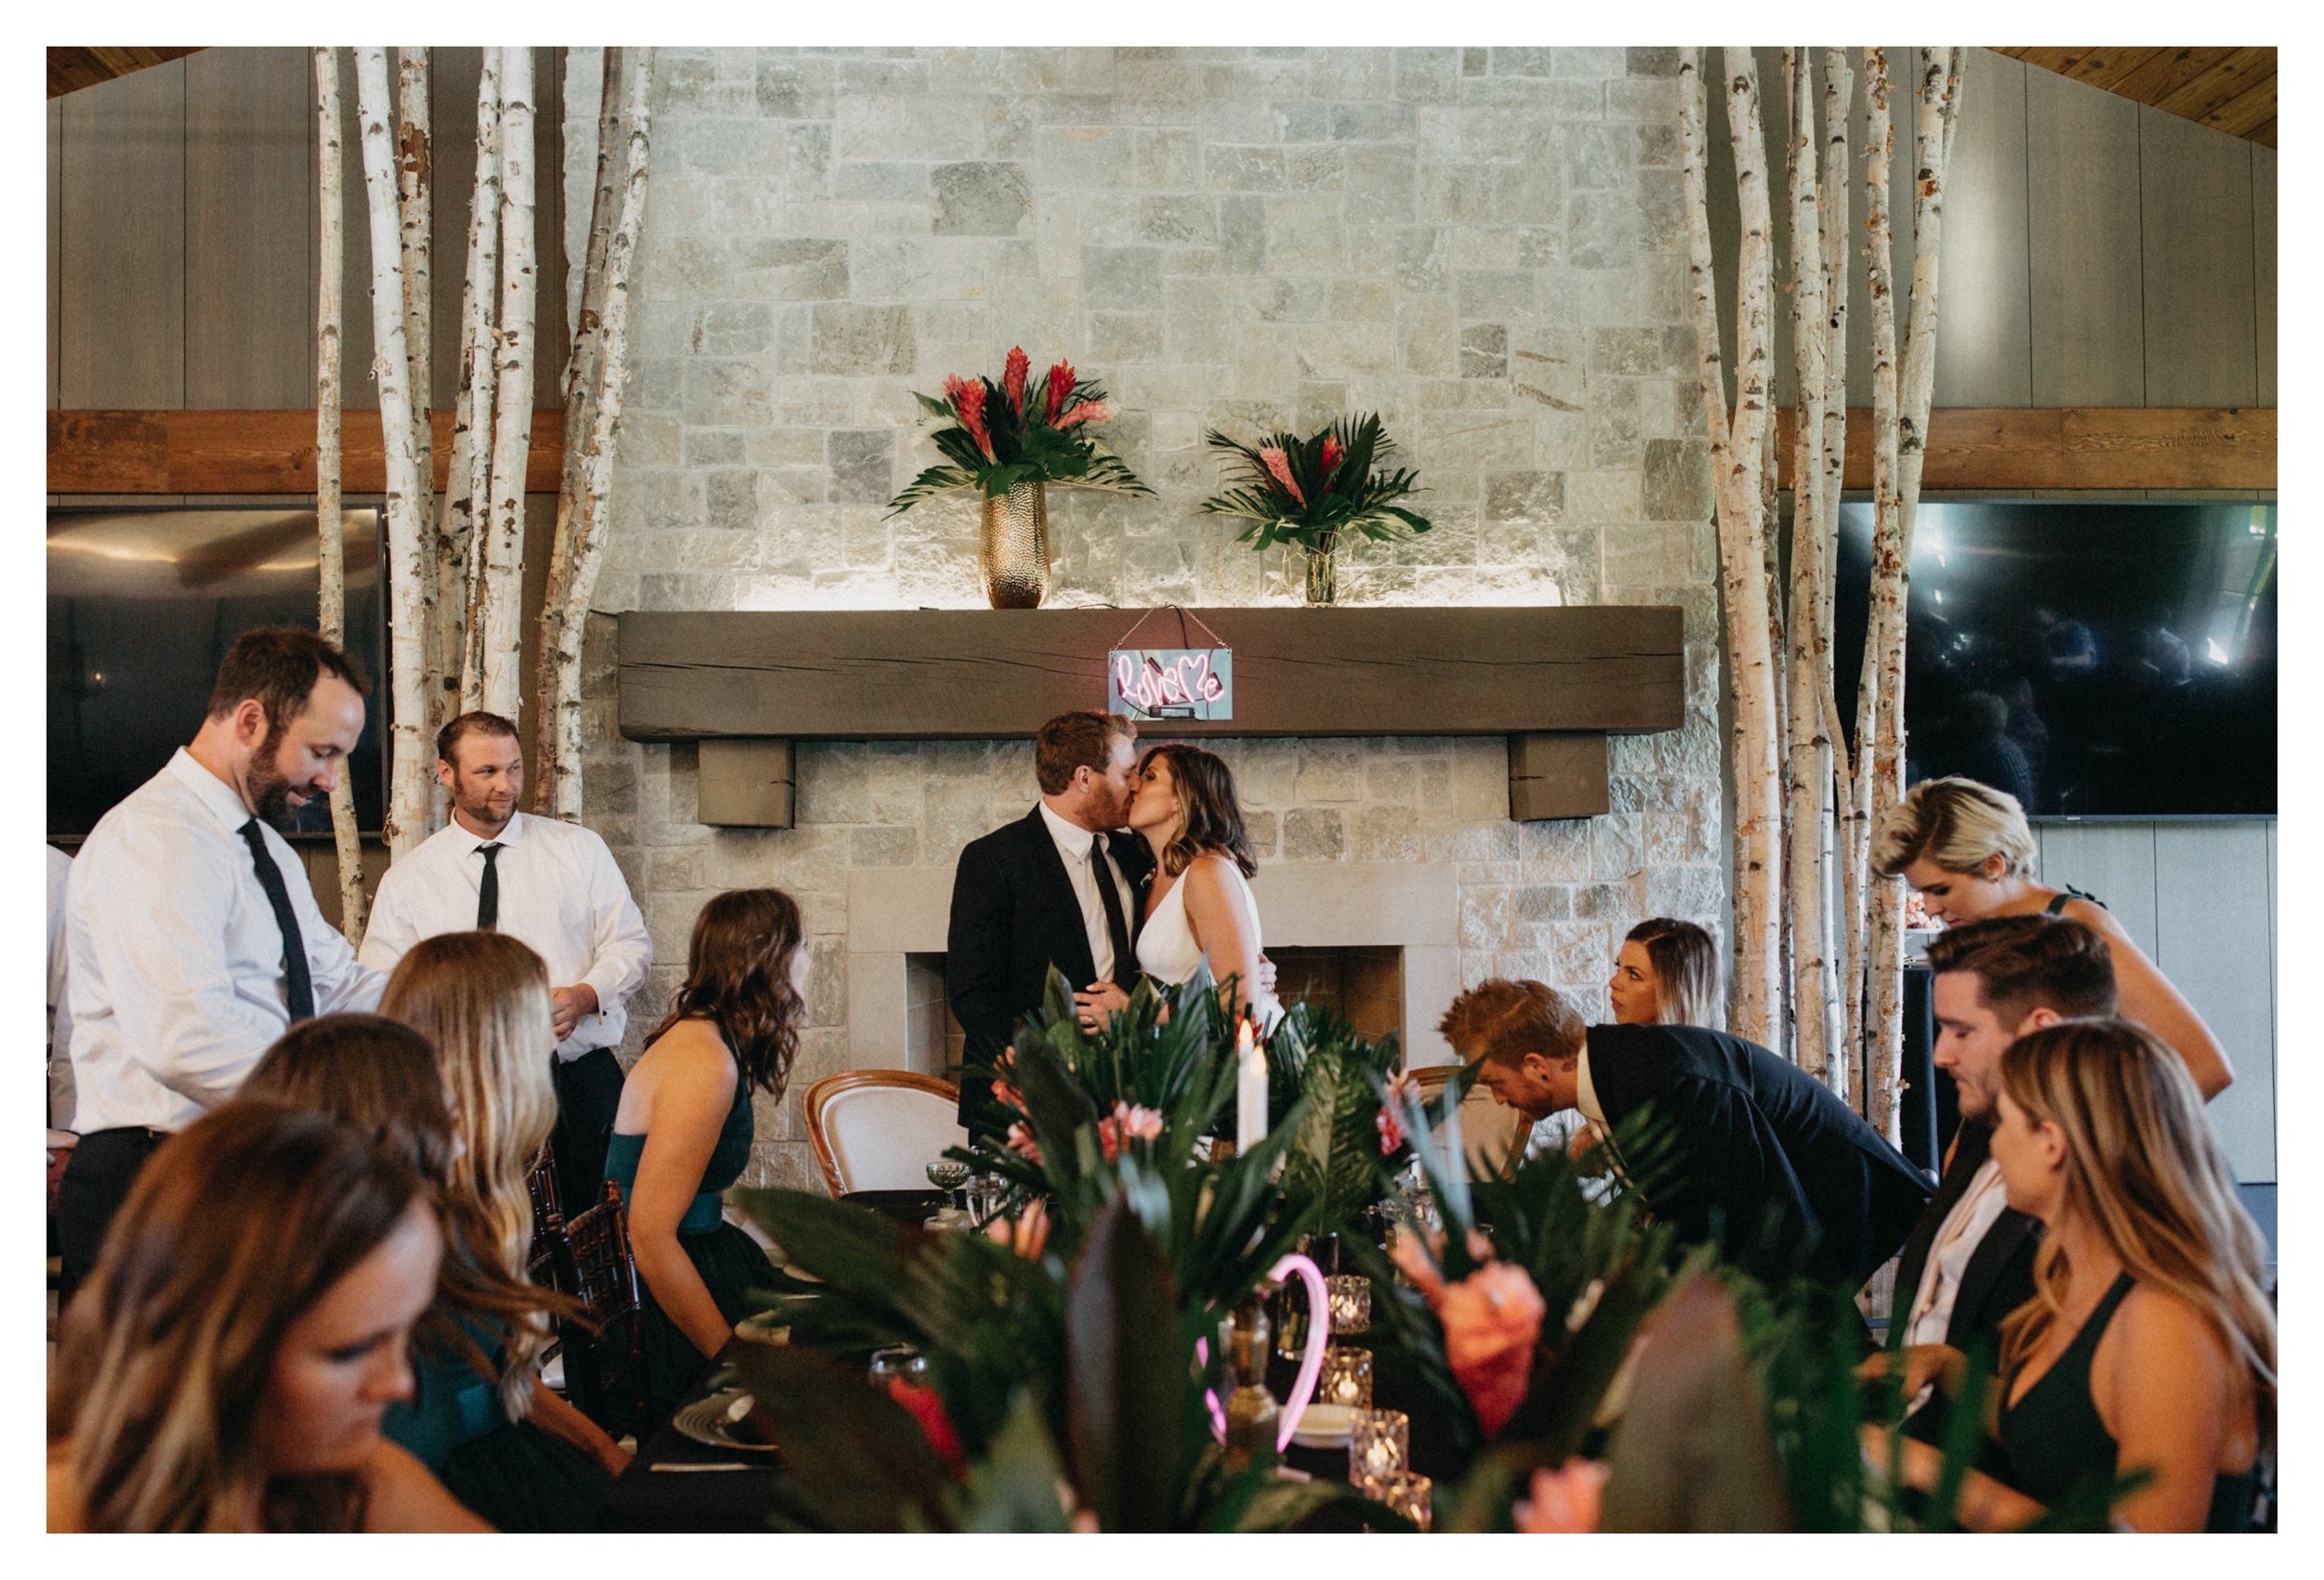 Bride and groom kissing in front of fireplace at 7 vines vineyard wedding reception